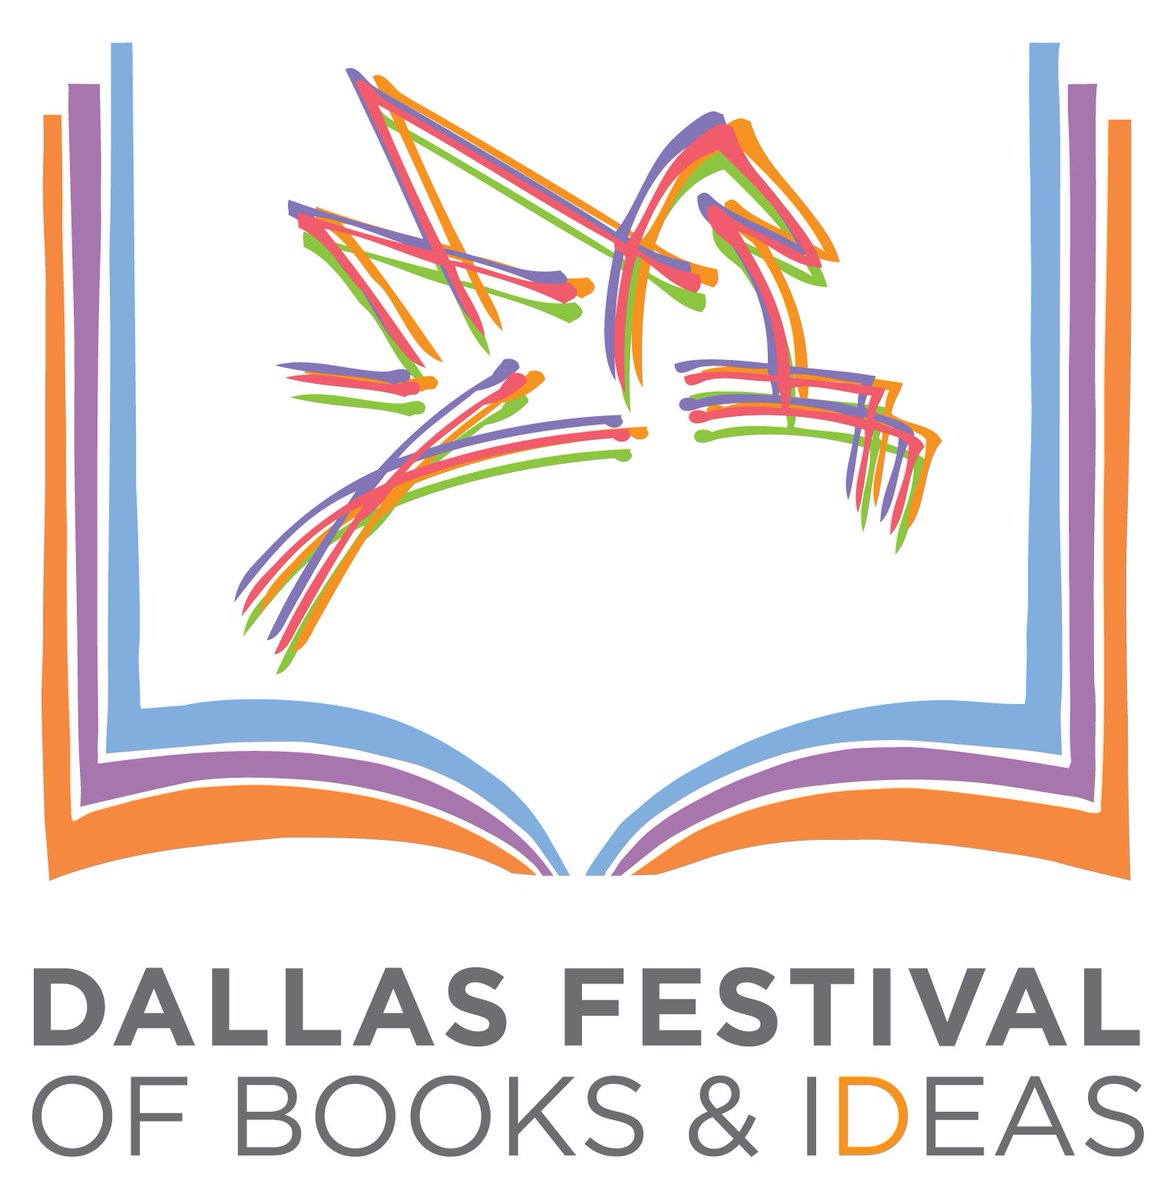 Can't wait to see everyone join in this #DallasEvent with @dallaslibrary